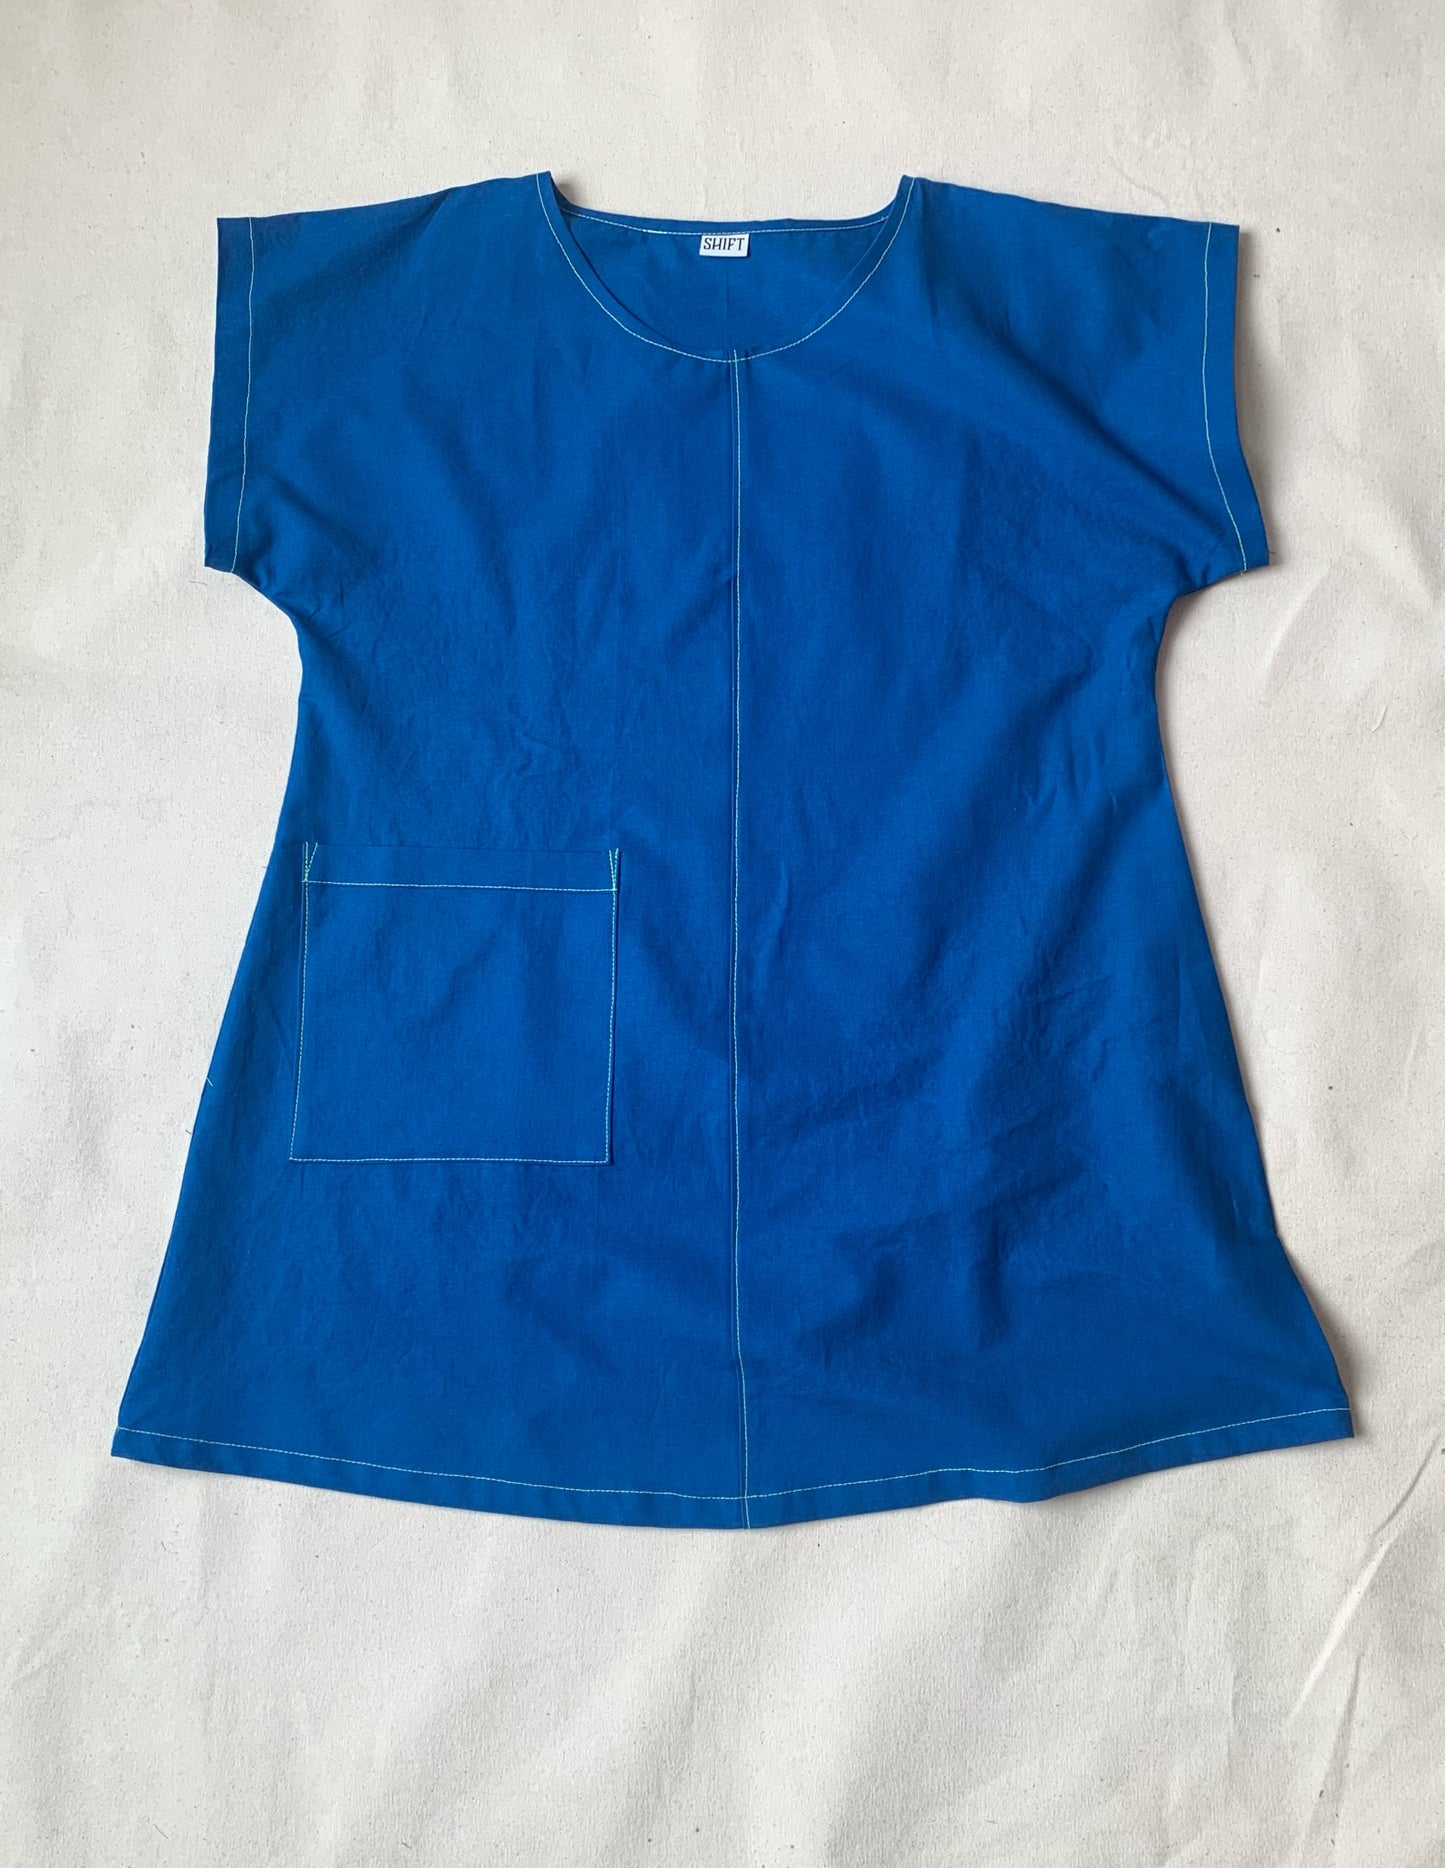 Brightest blue tunic with neon yellow/green topstitching and one big pocket. 55% linen, 45% cotton, medium weight.